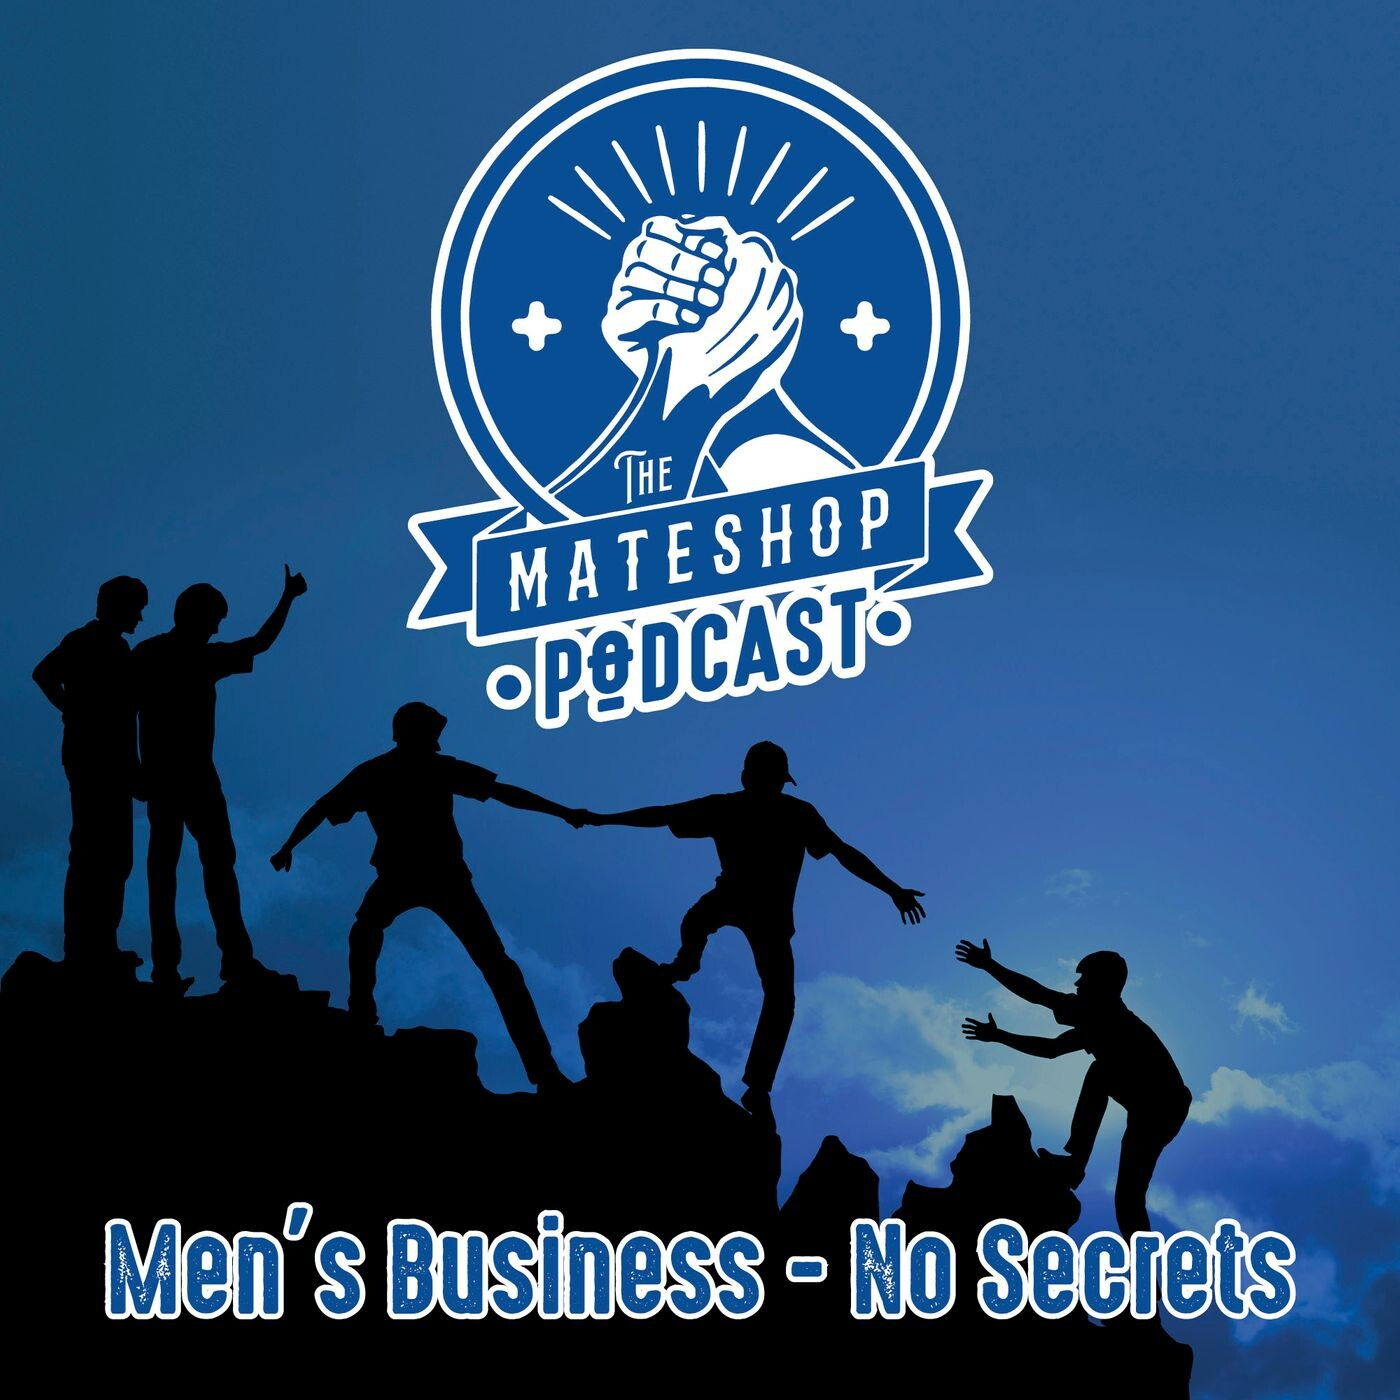 The Mateshop Podcast - What Is The Mateshop All About